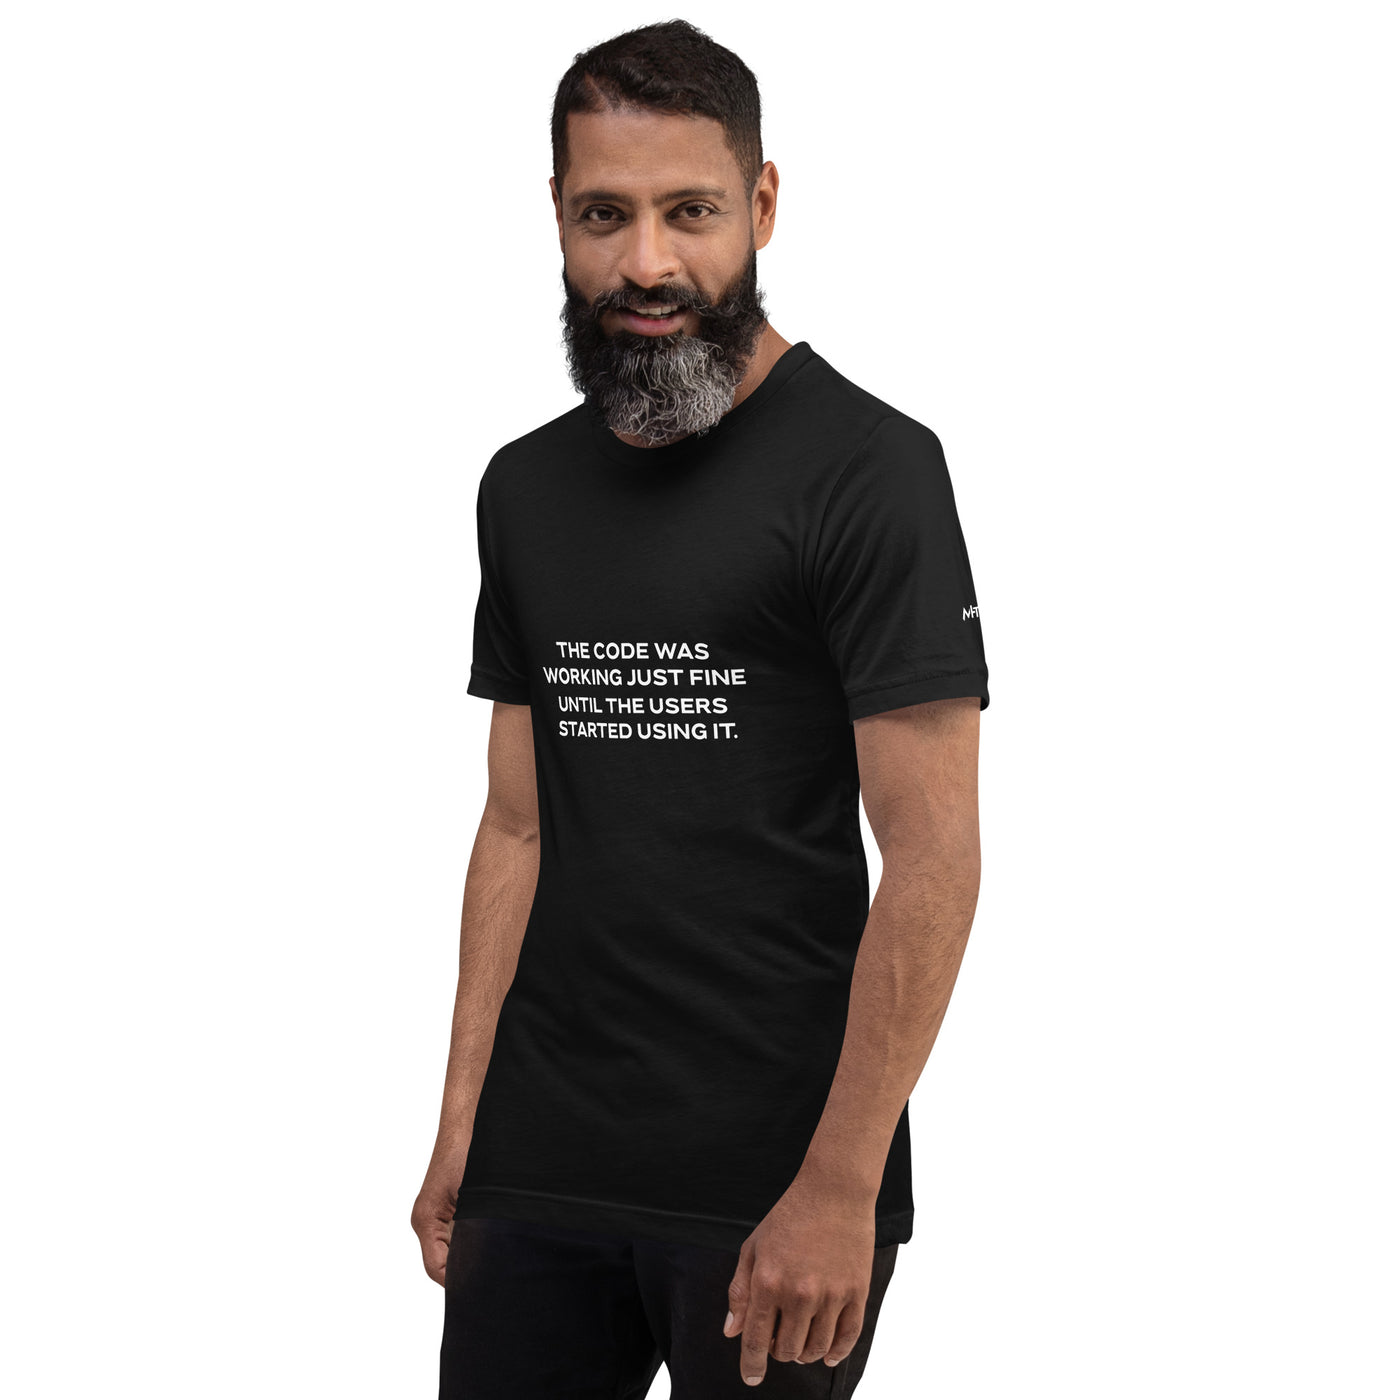 The code was working just fine until the users started using it - Unisex t-shirt